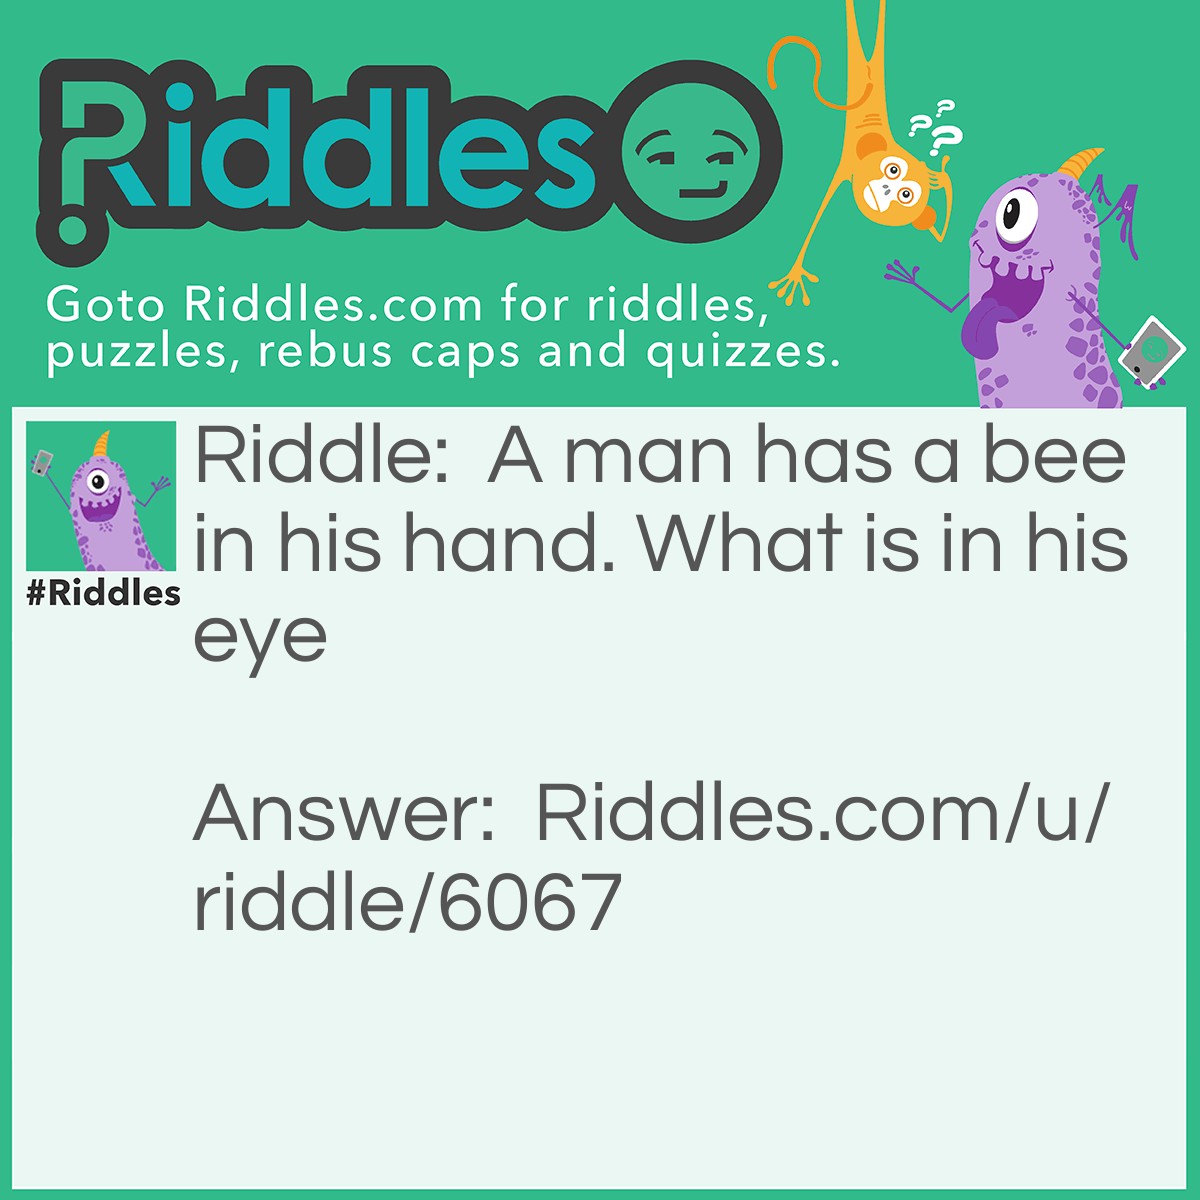 Riddle: A man has a bee in his hand. What is in his eye Answer: WHAT is in his eye! there is a period after "bee," so it states that "what" is in his eye!